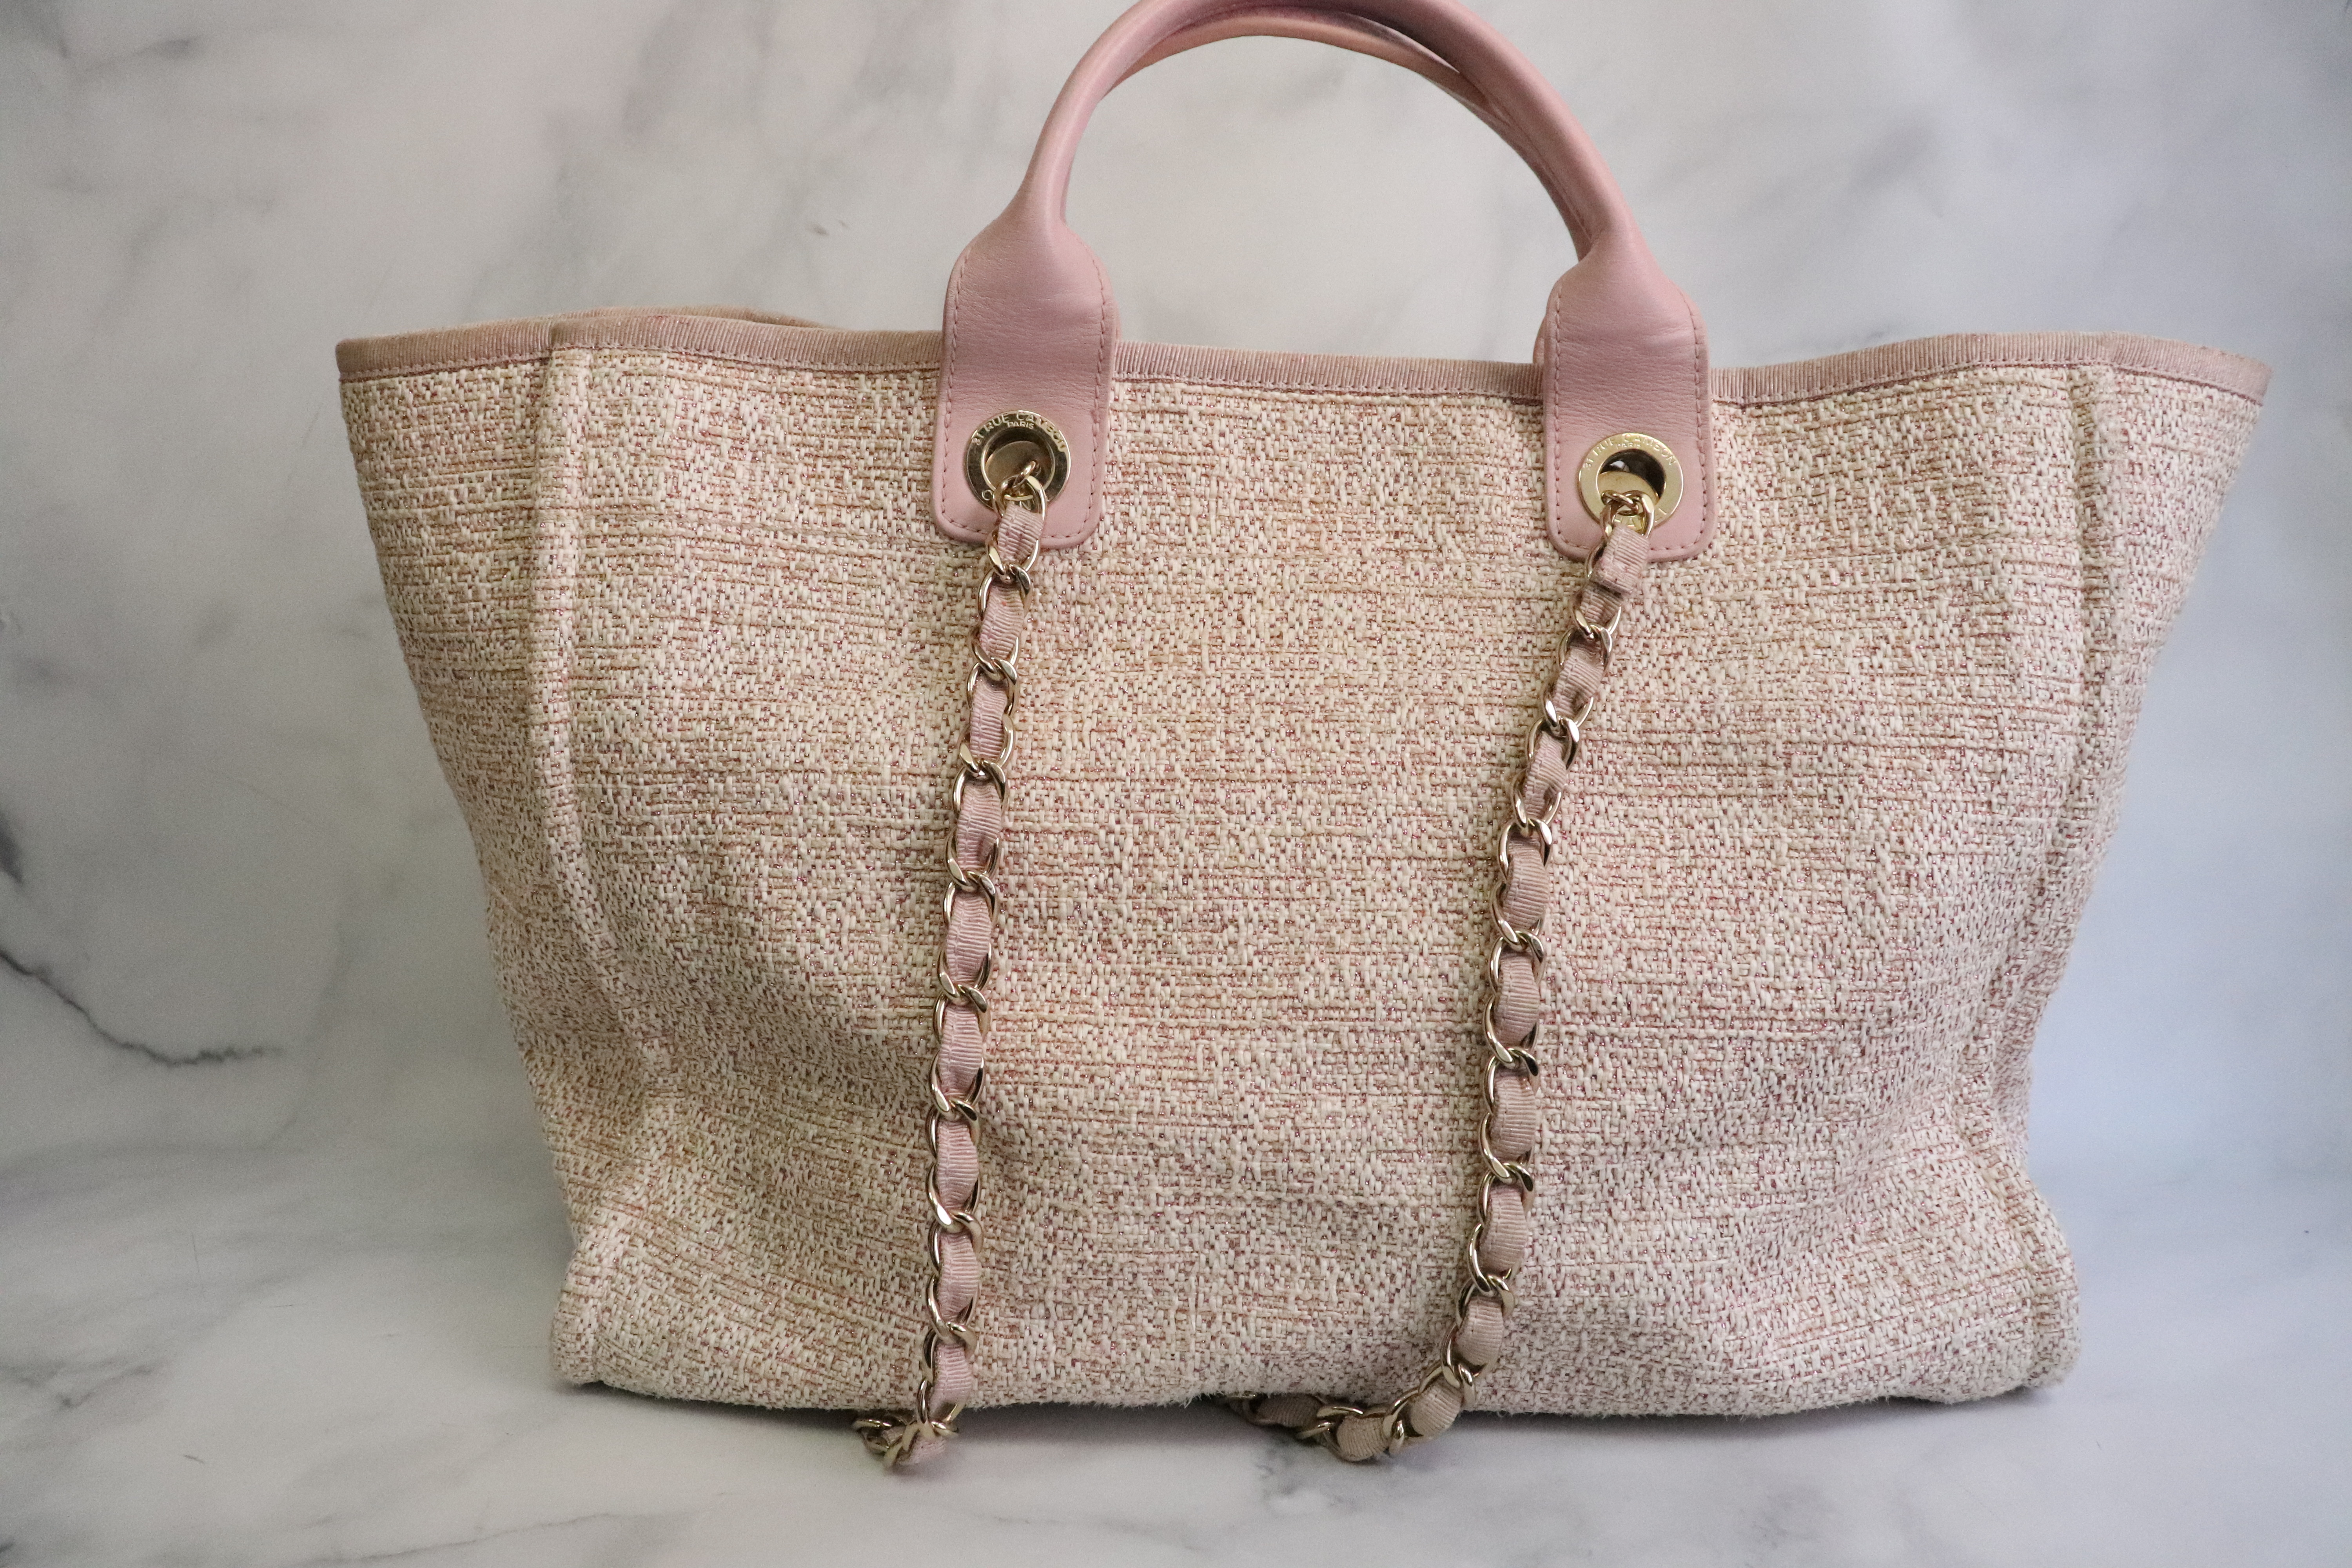 Chanel Deauville Tote Bag, Large, Pink Tweed, Shiny Gold Hardware, Preowned  - No Dustbag - Julia Rose Boston